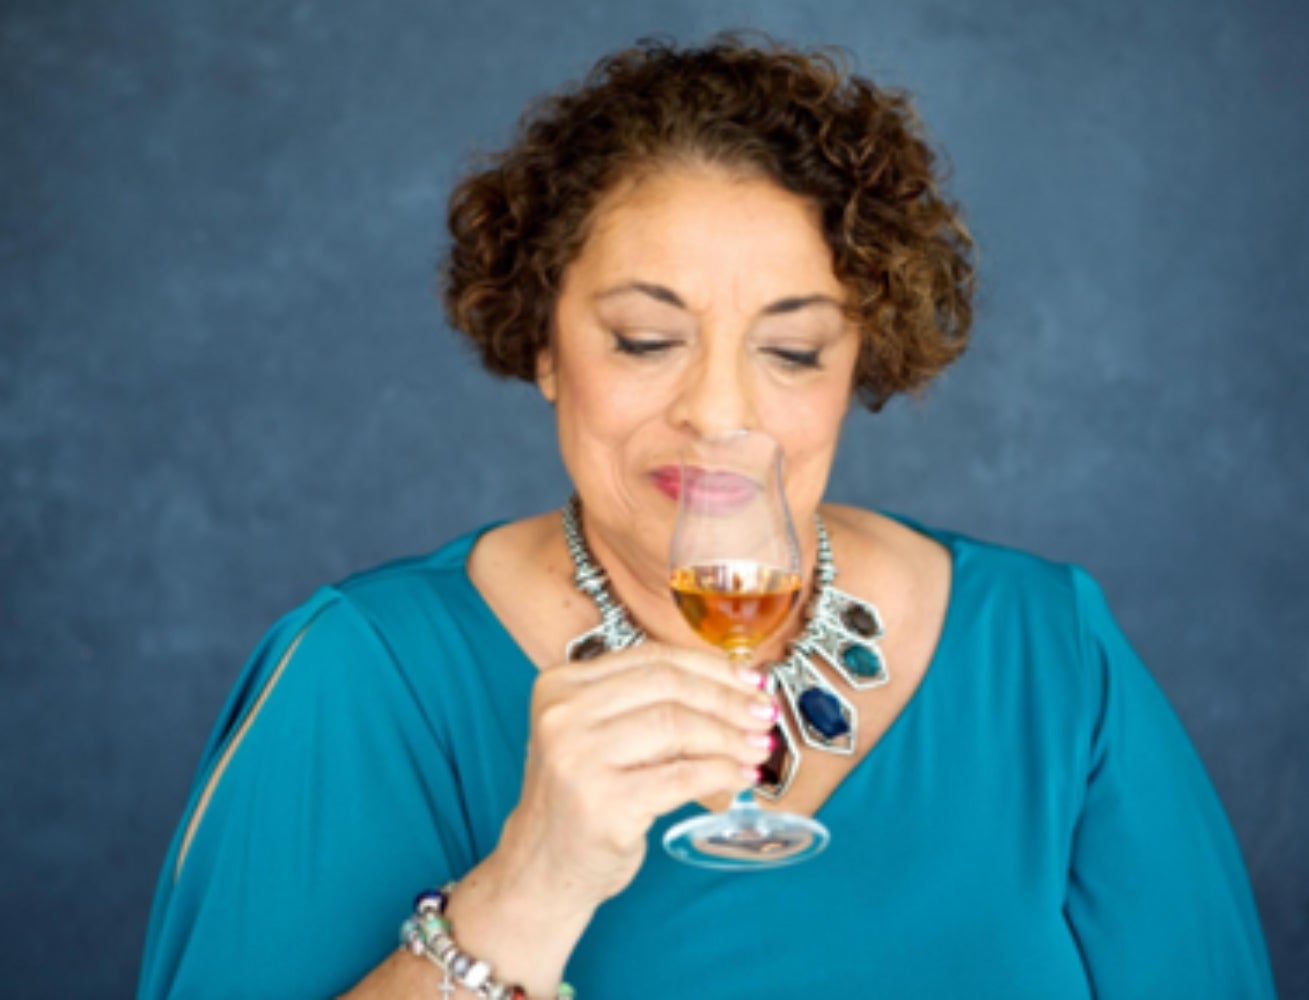 Let’s Toast: Joy Spence Is The First Woman Master Blender And After 40 Years, She’s Still On Top